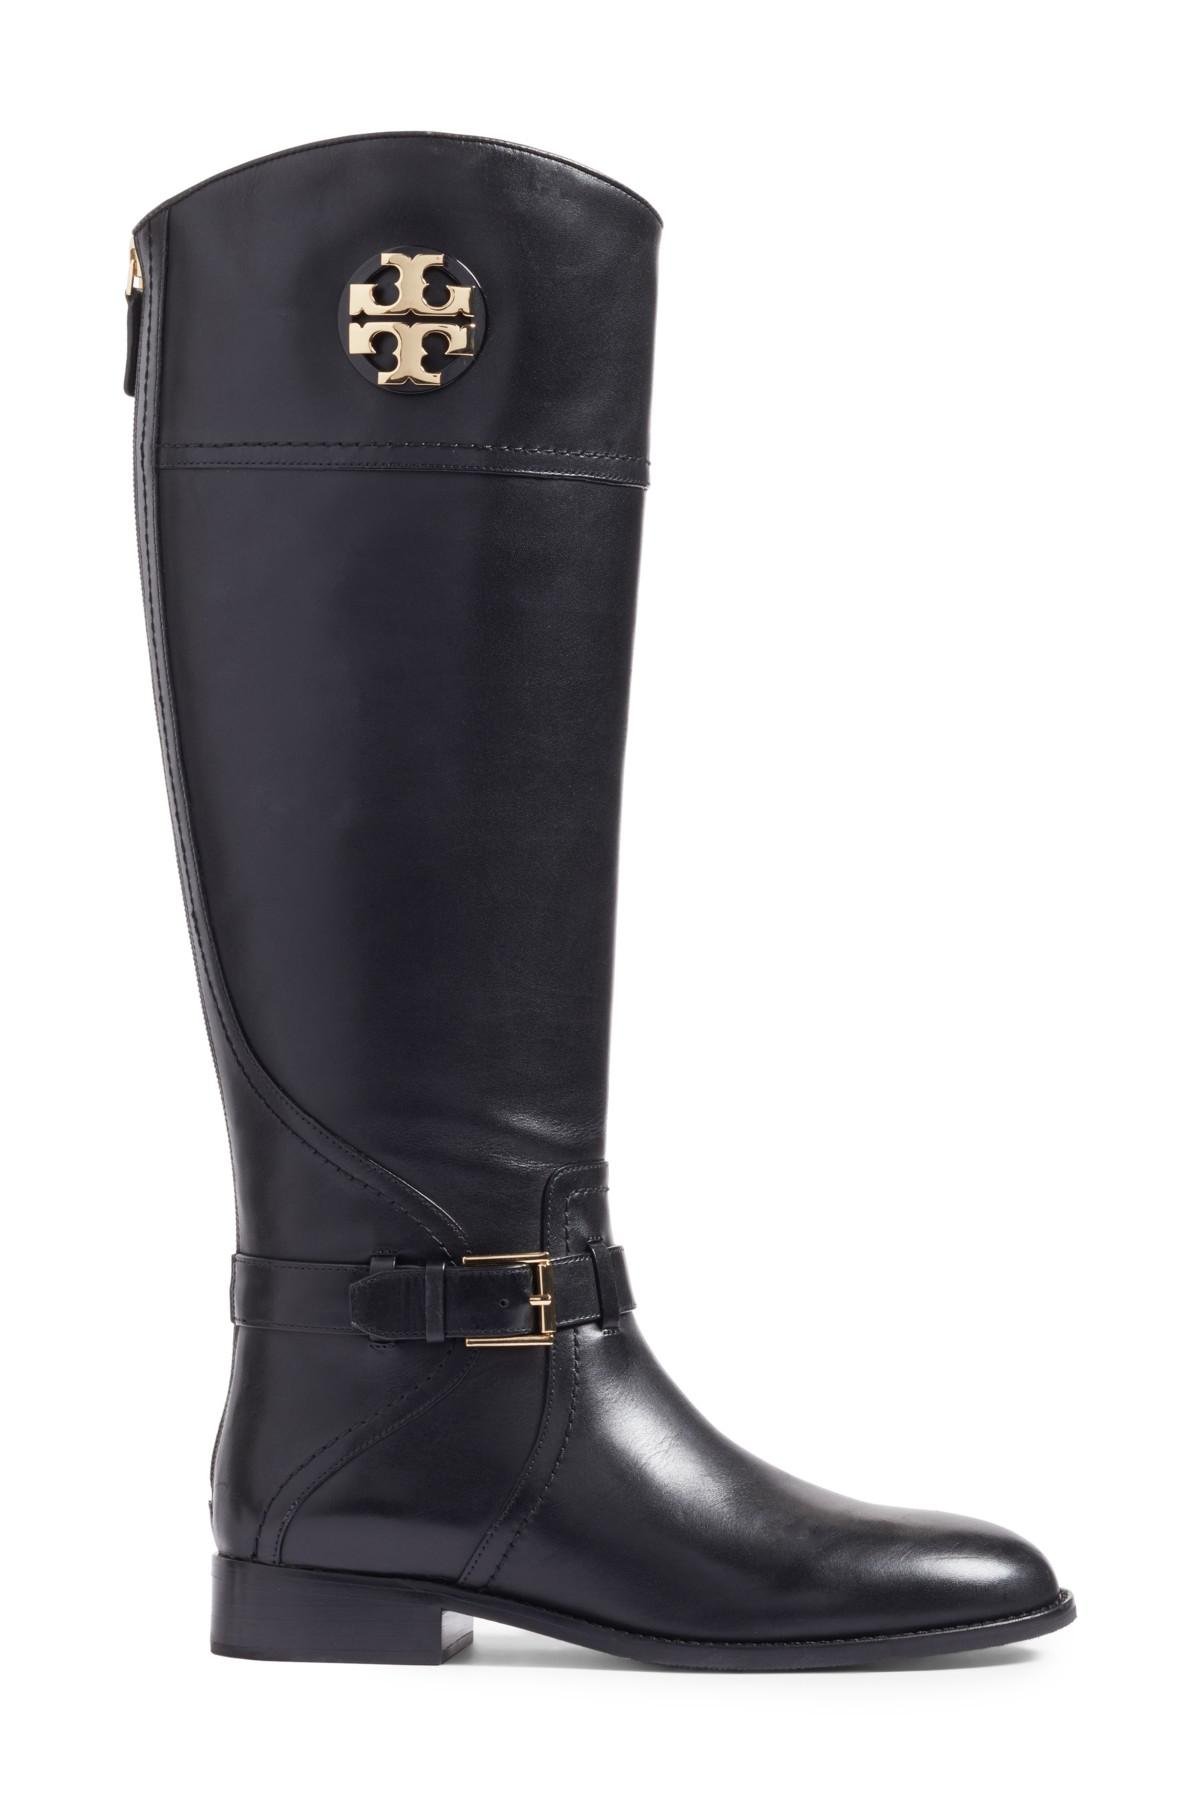 Lyst - Tory Burch Adeline Boots in Black